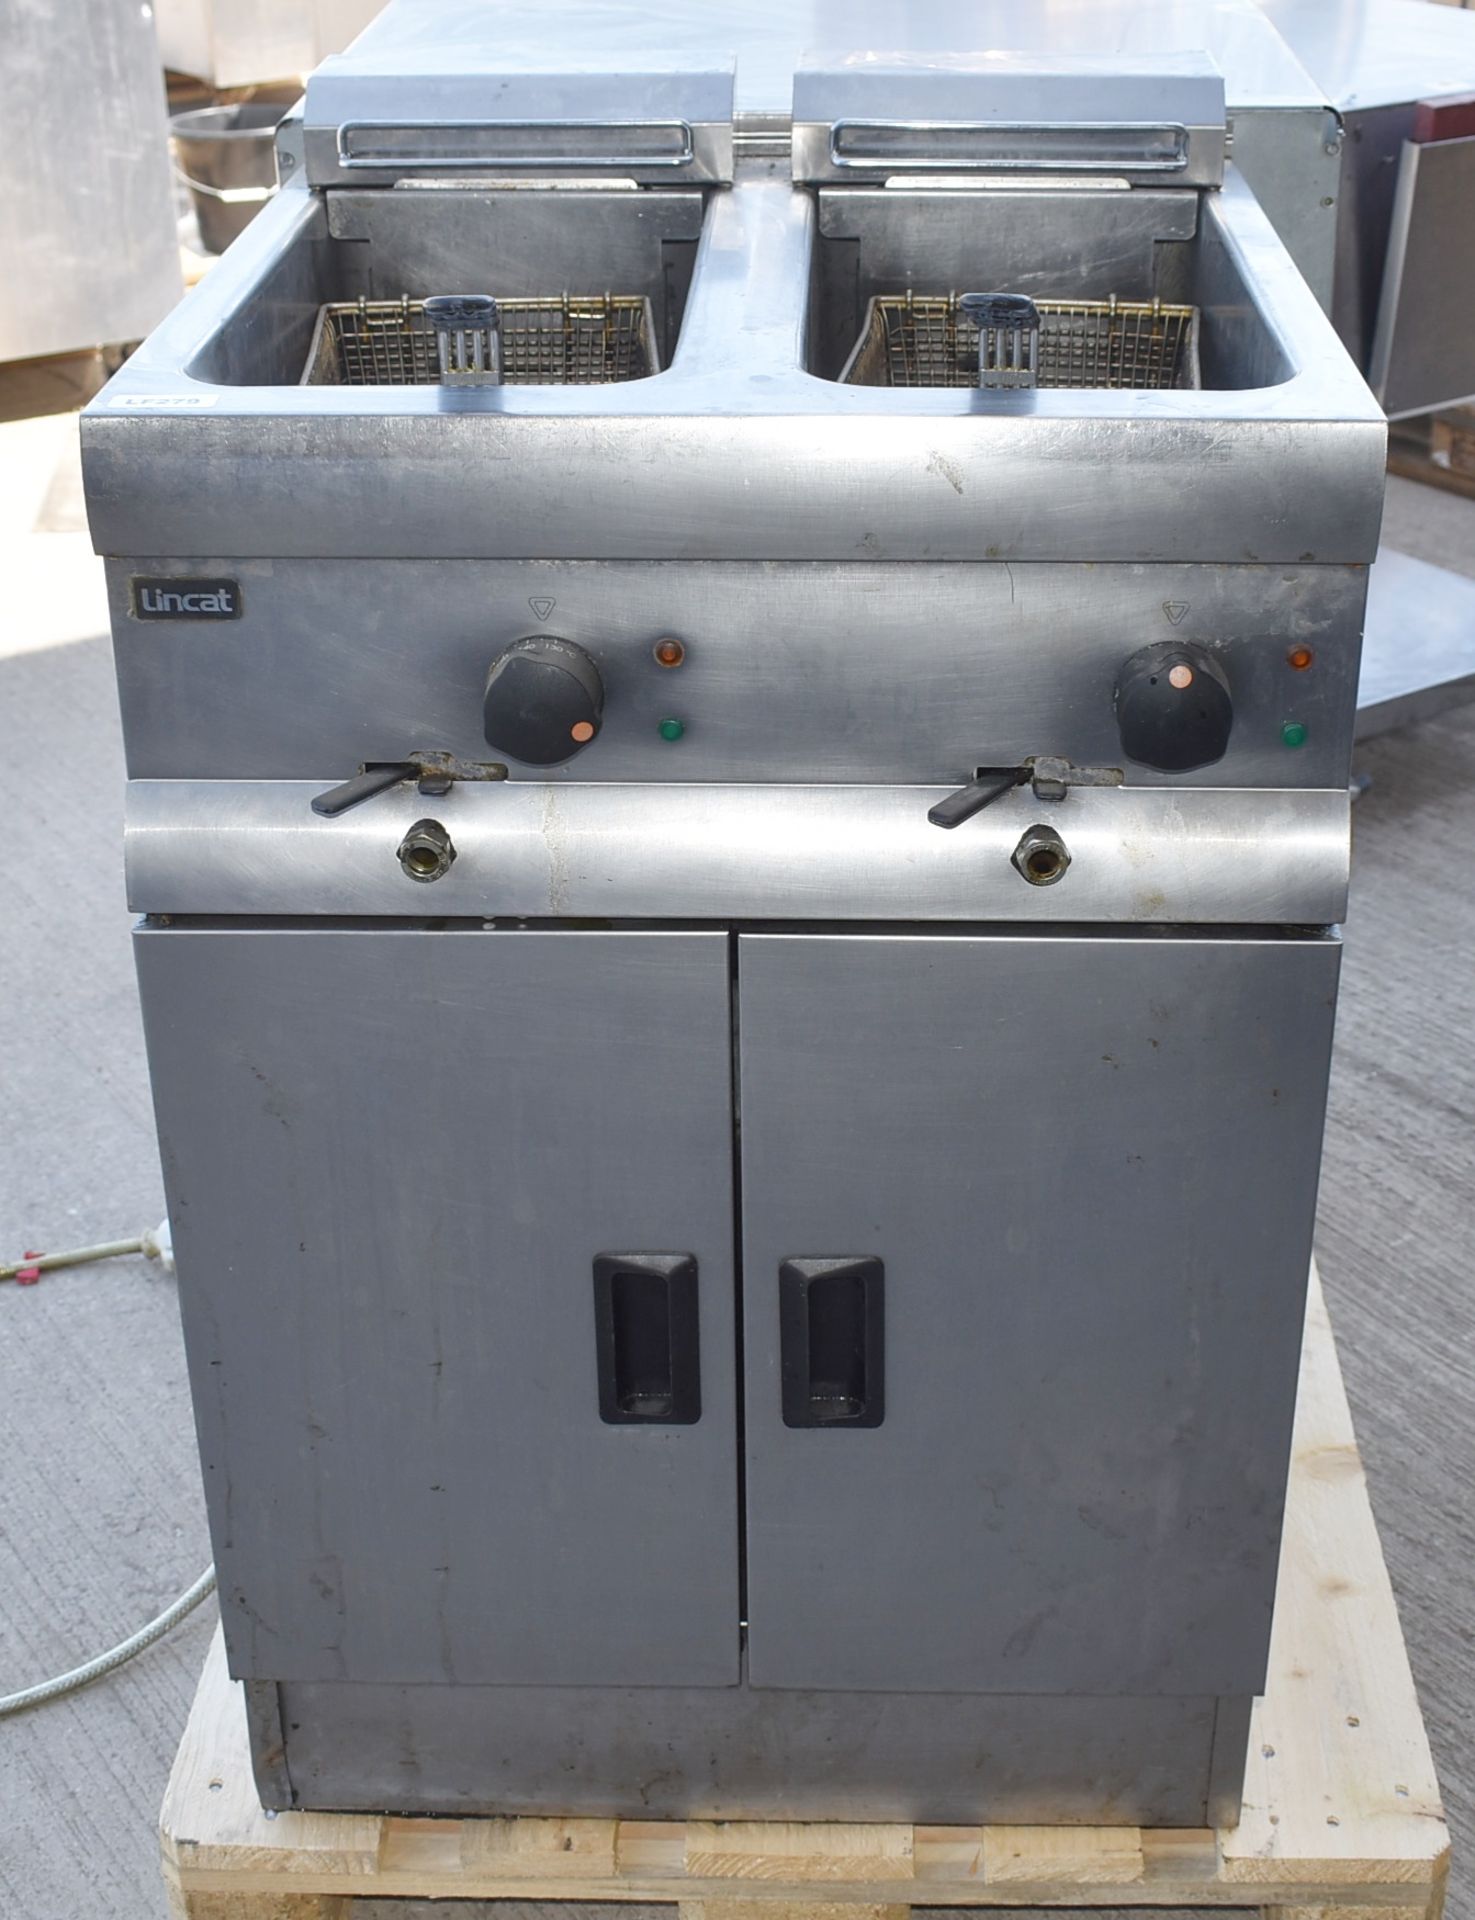 1 x Lincat Twin Basket Commercial Fryer With Stainless Steel Finish, Lower Warming Cupboard and - Image 4 of 8